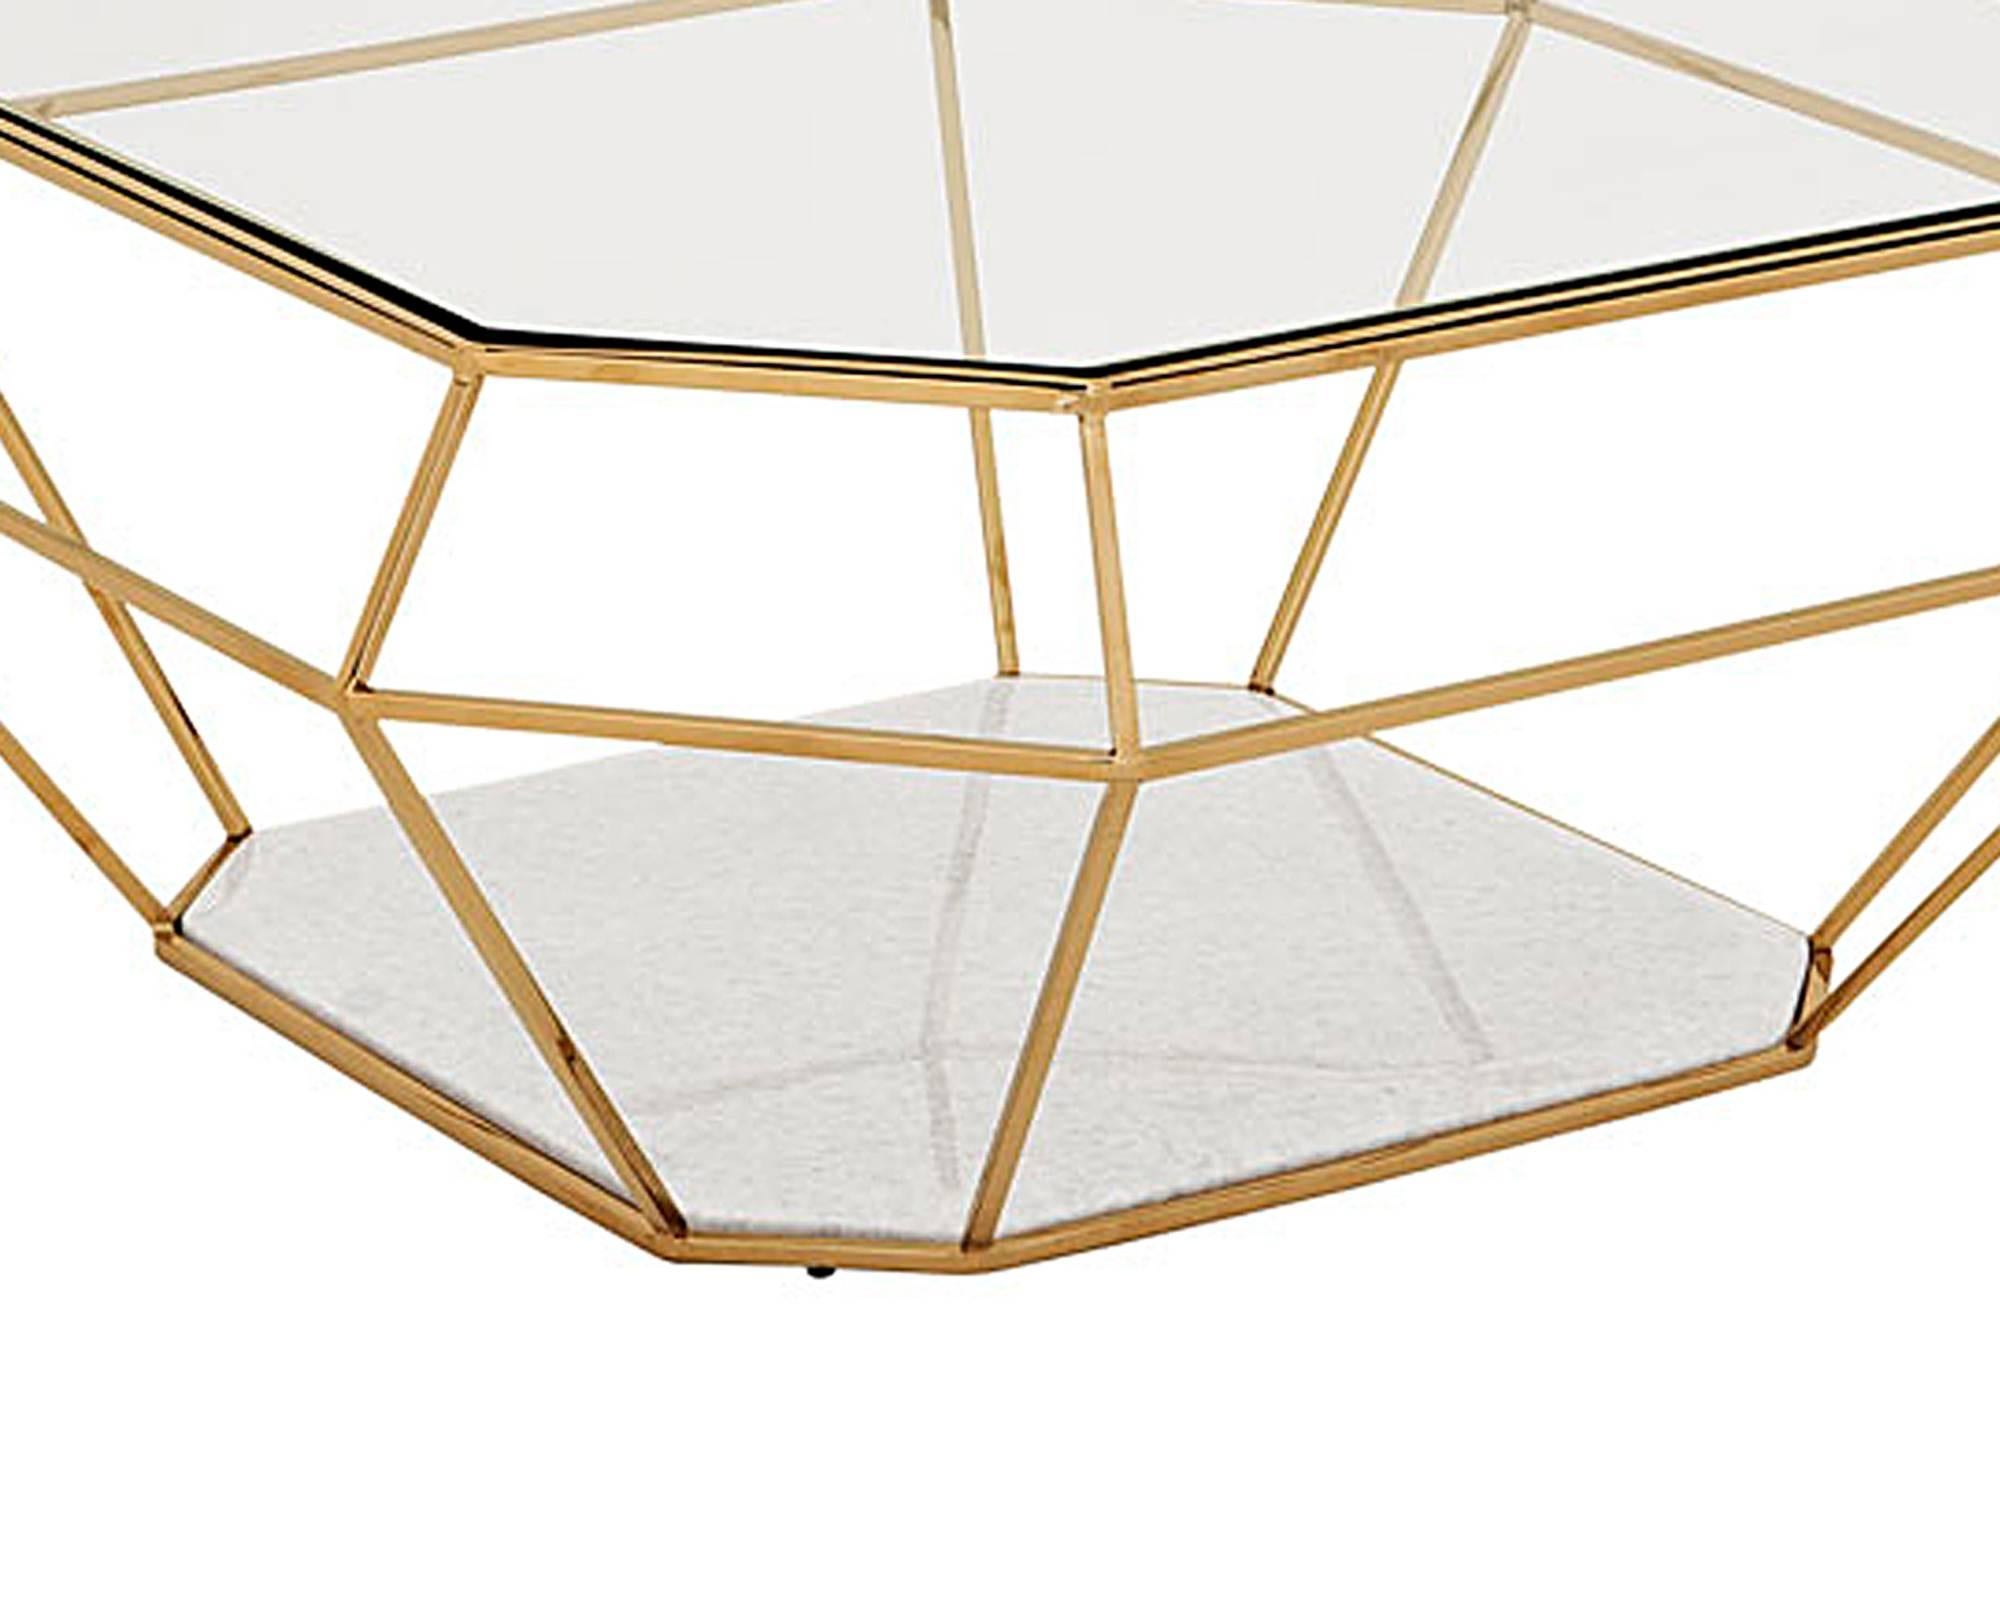 Diamond coffee table with stainless steel structure
in gold finish. Clear glass top and white marble base.
Also available in polished stainless steel finish.
